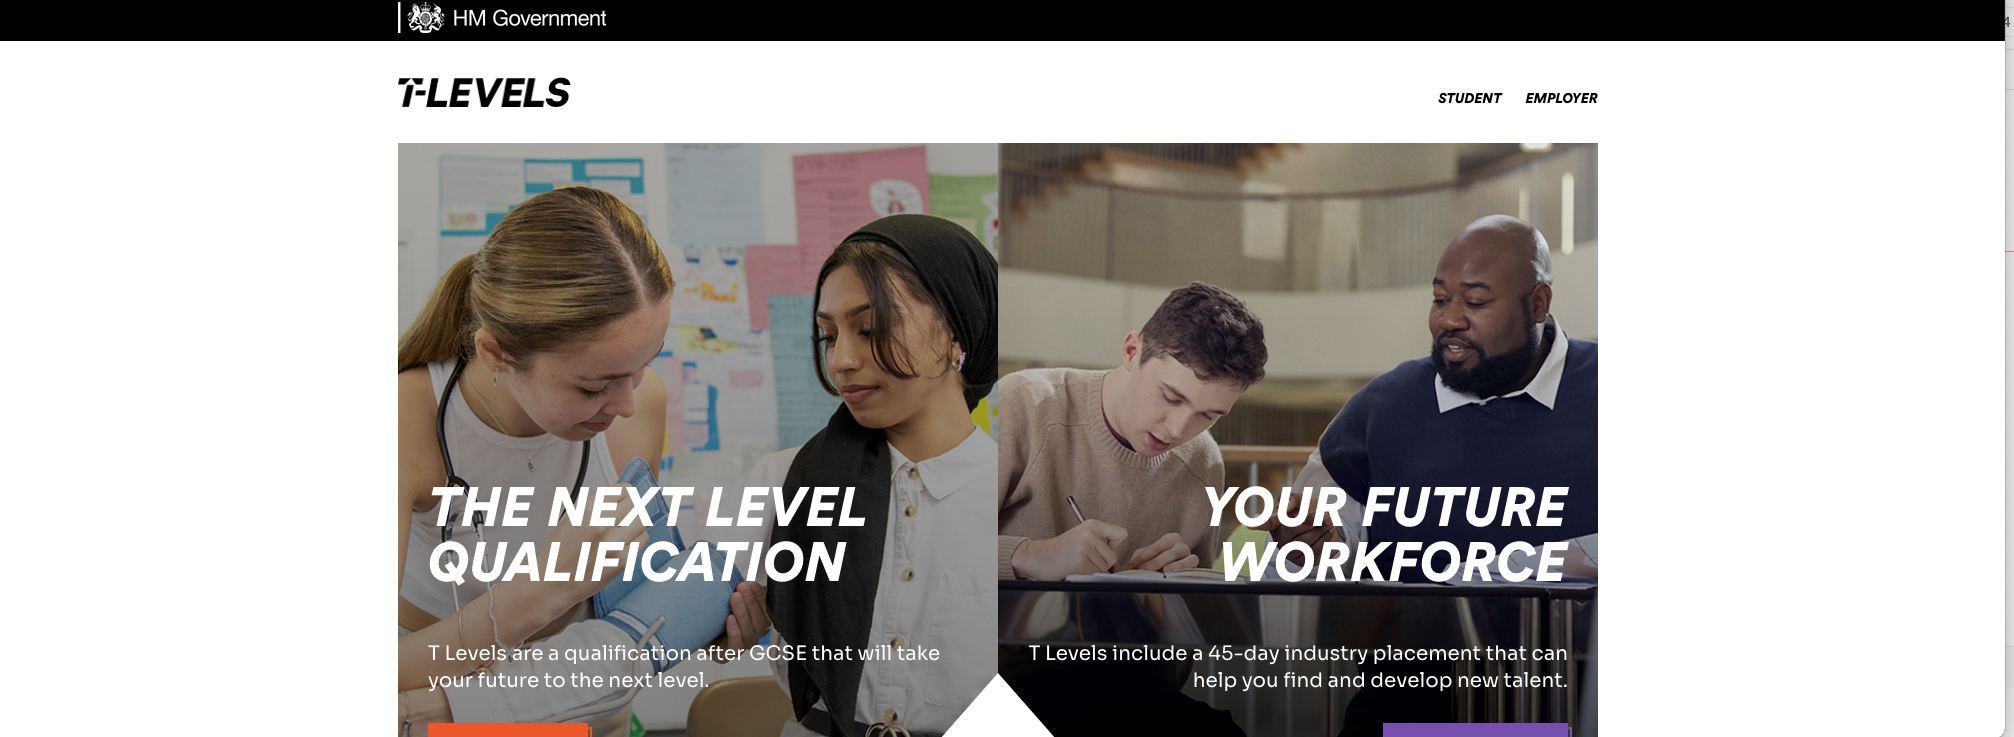 screenshot of the HM goverment website page on T-levels